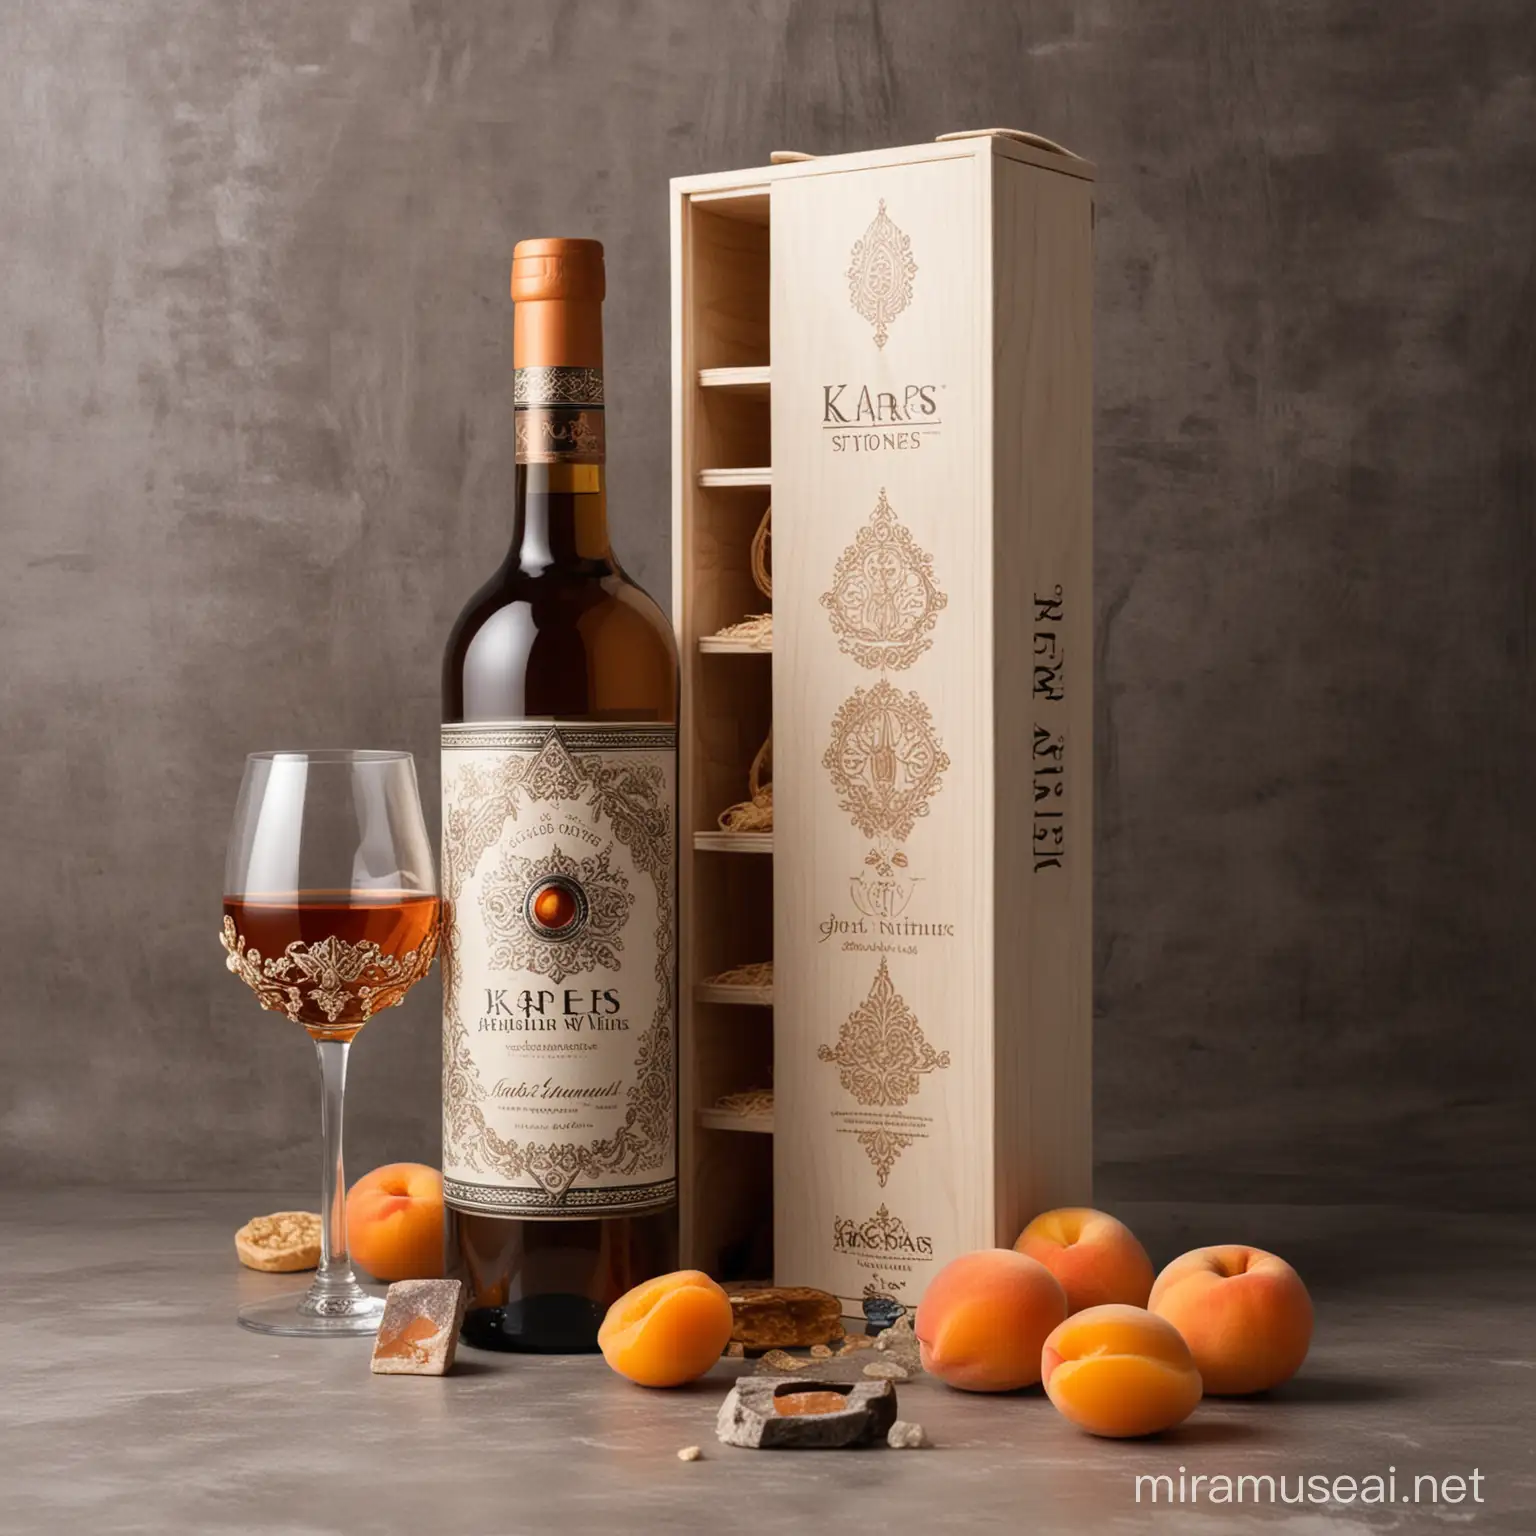 royal Armenian traditional apricot wine called "KARS" modern wine bottle and box with elegant packaging, modern and exclusive style Armenian stones and ornamentation